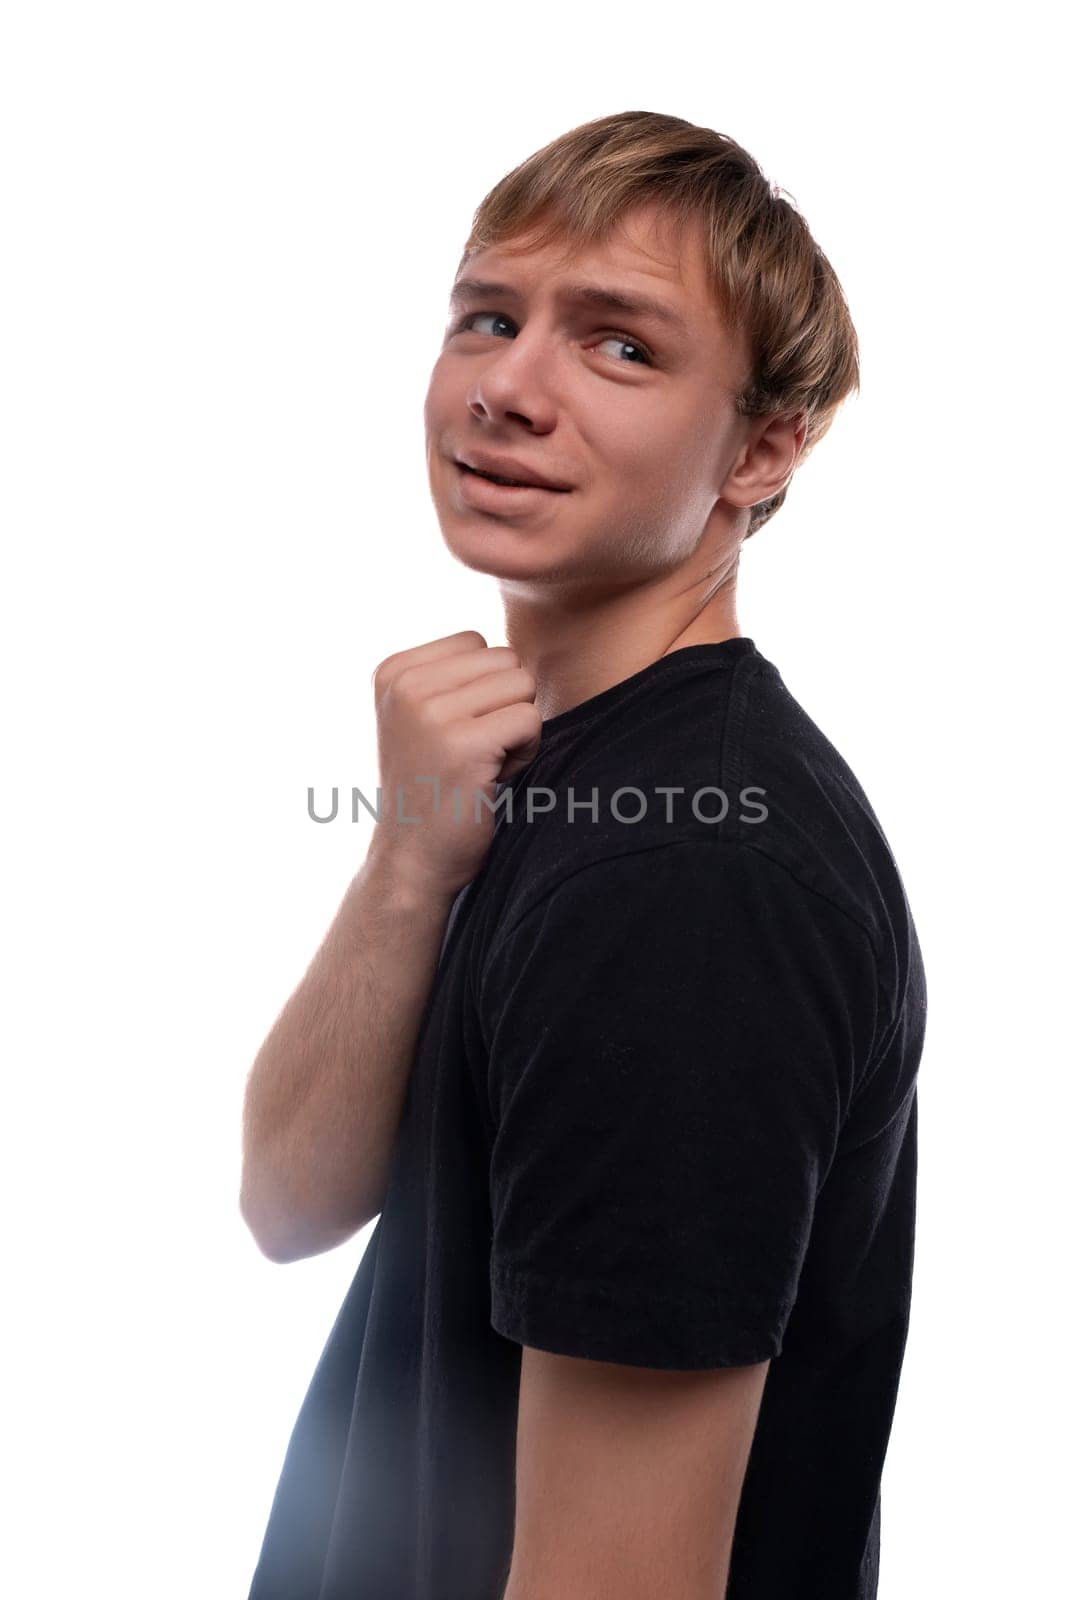 Blond teenager boy smiling on white background.